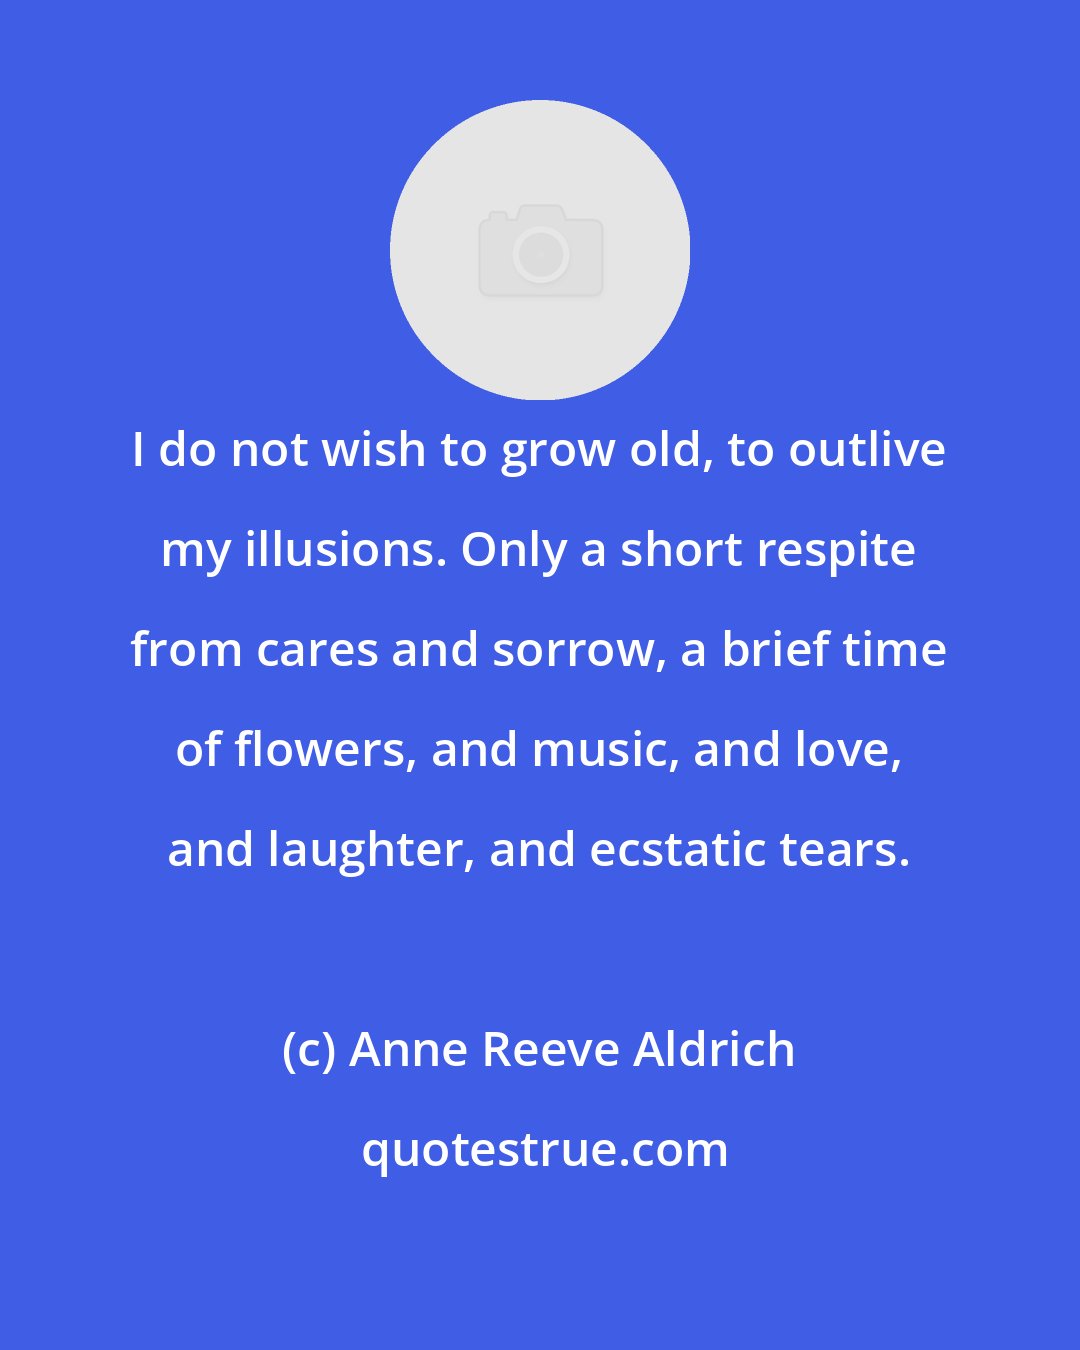 Anne Reeve Aldrich: I do not wish to grow old, to outlive my illusions. Only a short respite from cares and sorrow, a brief time of flowers, and music, and love, and laughter, and ecstatic tears.